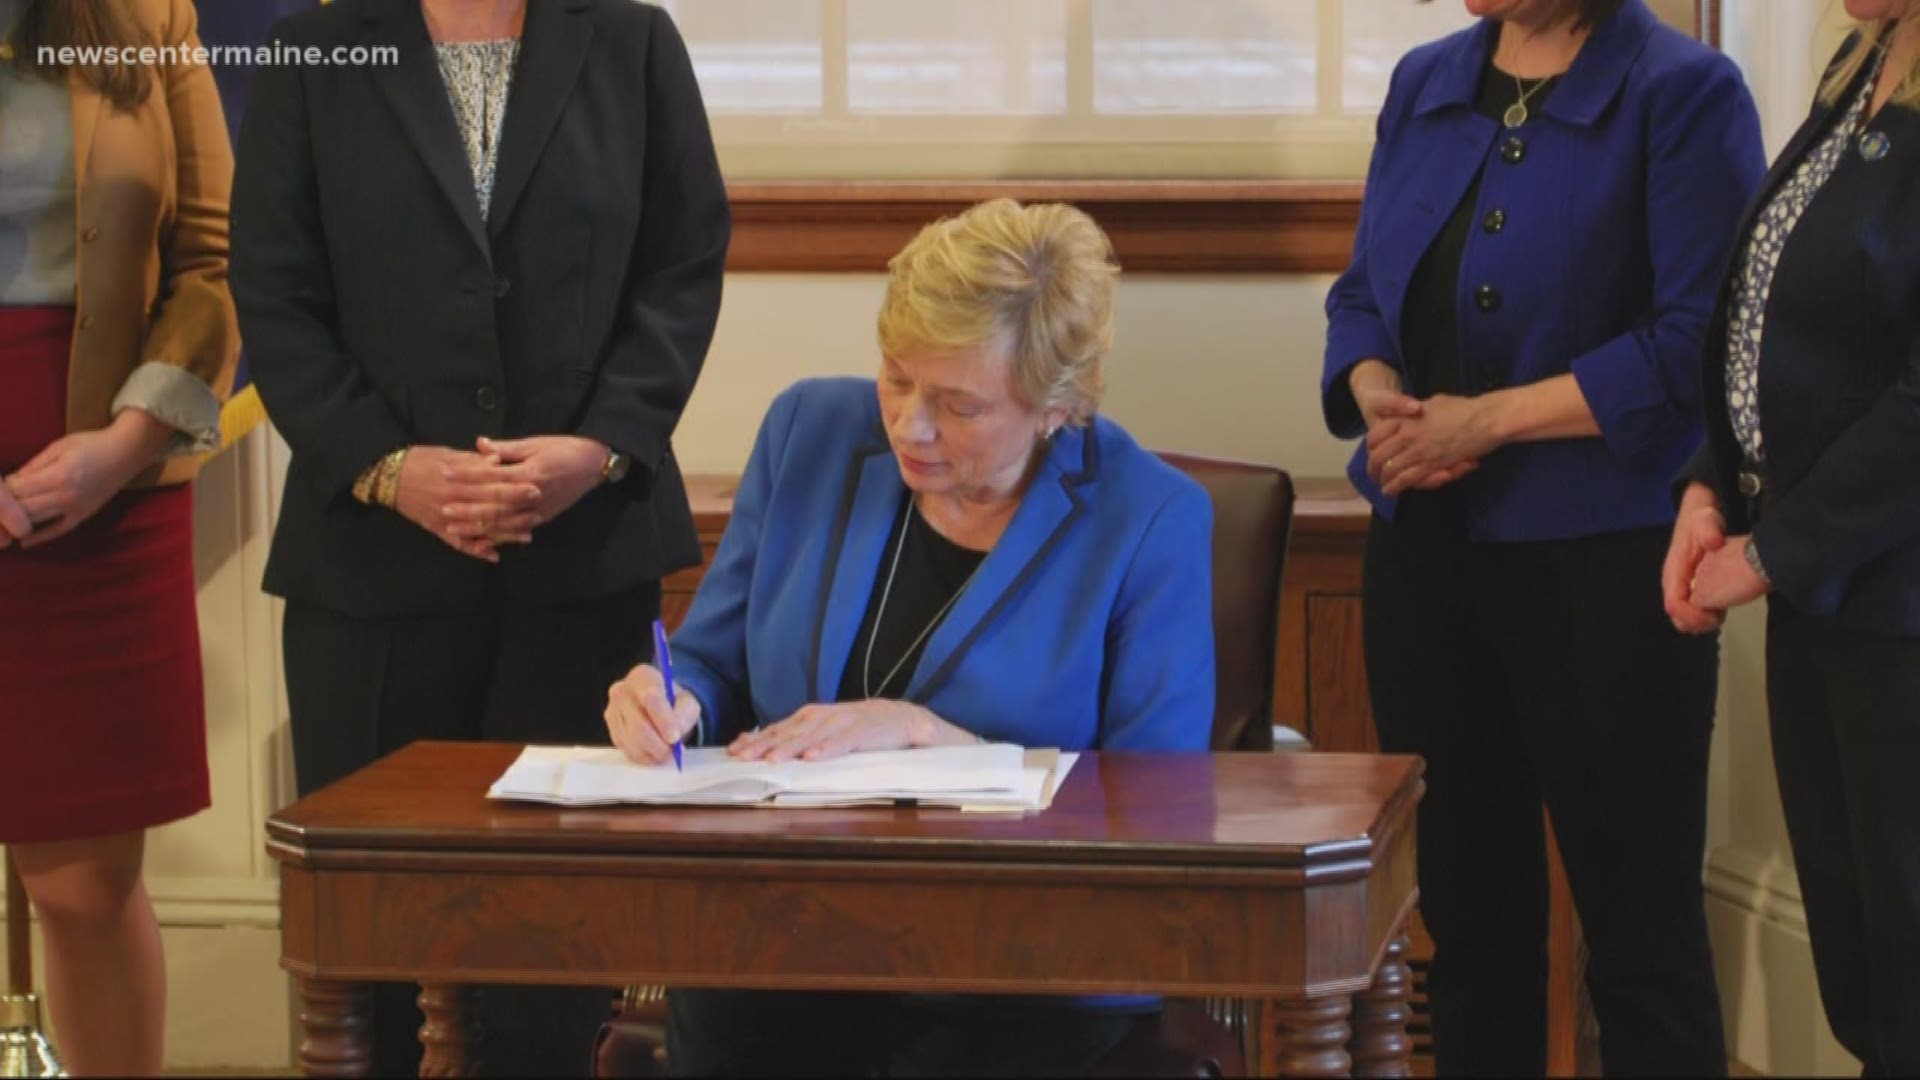 The controversial assisted suicide bill passed the legislature, but Gov. Mills still does not know if she will sign it into law.